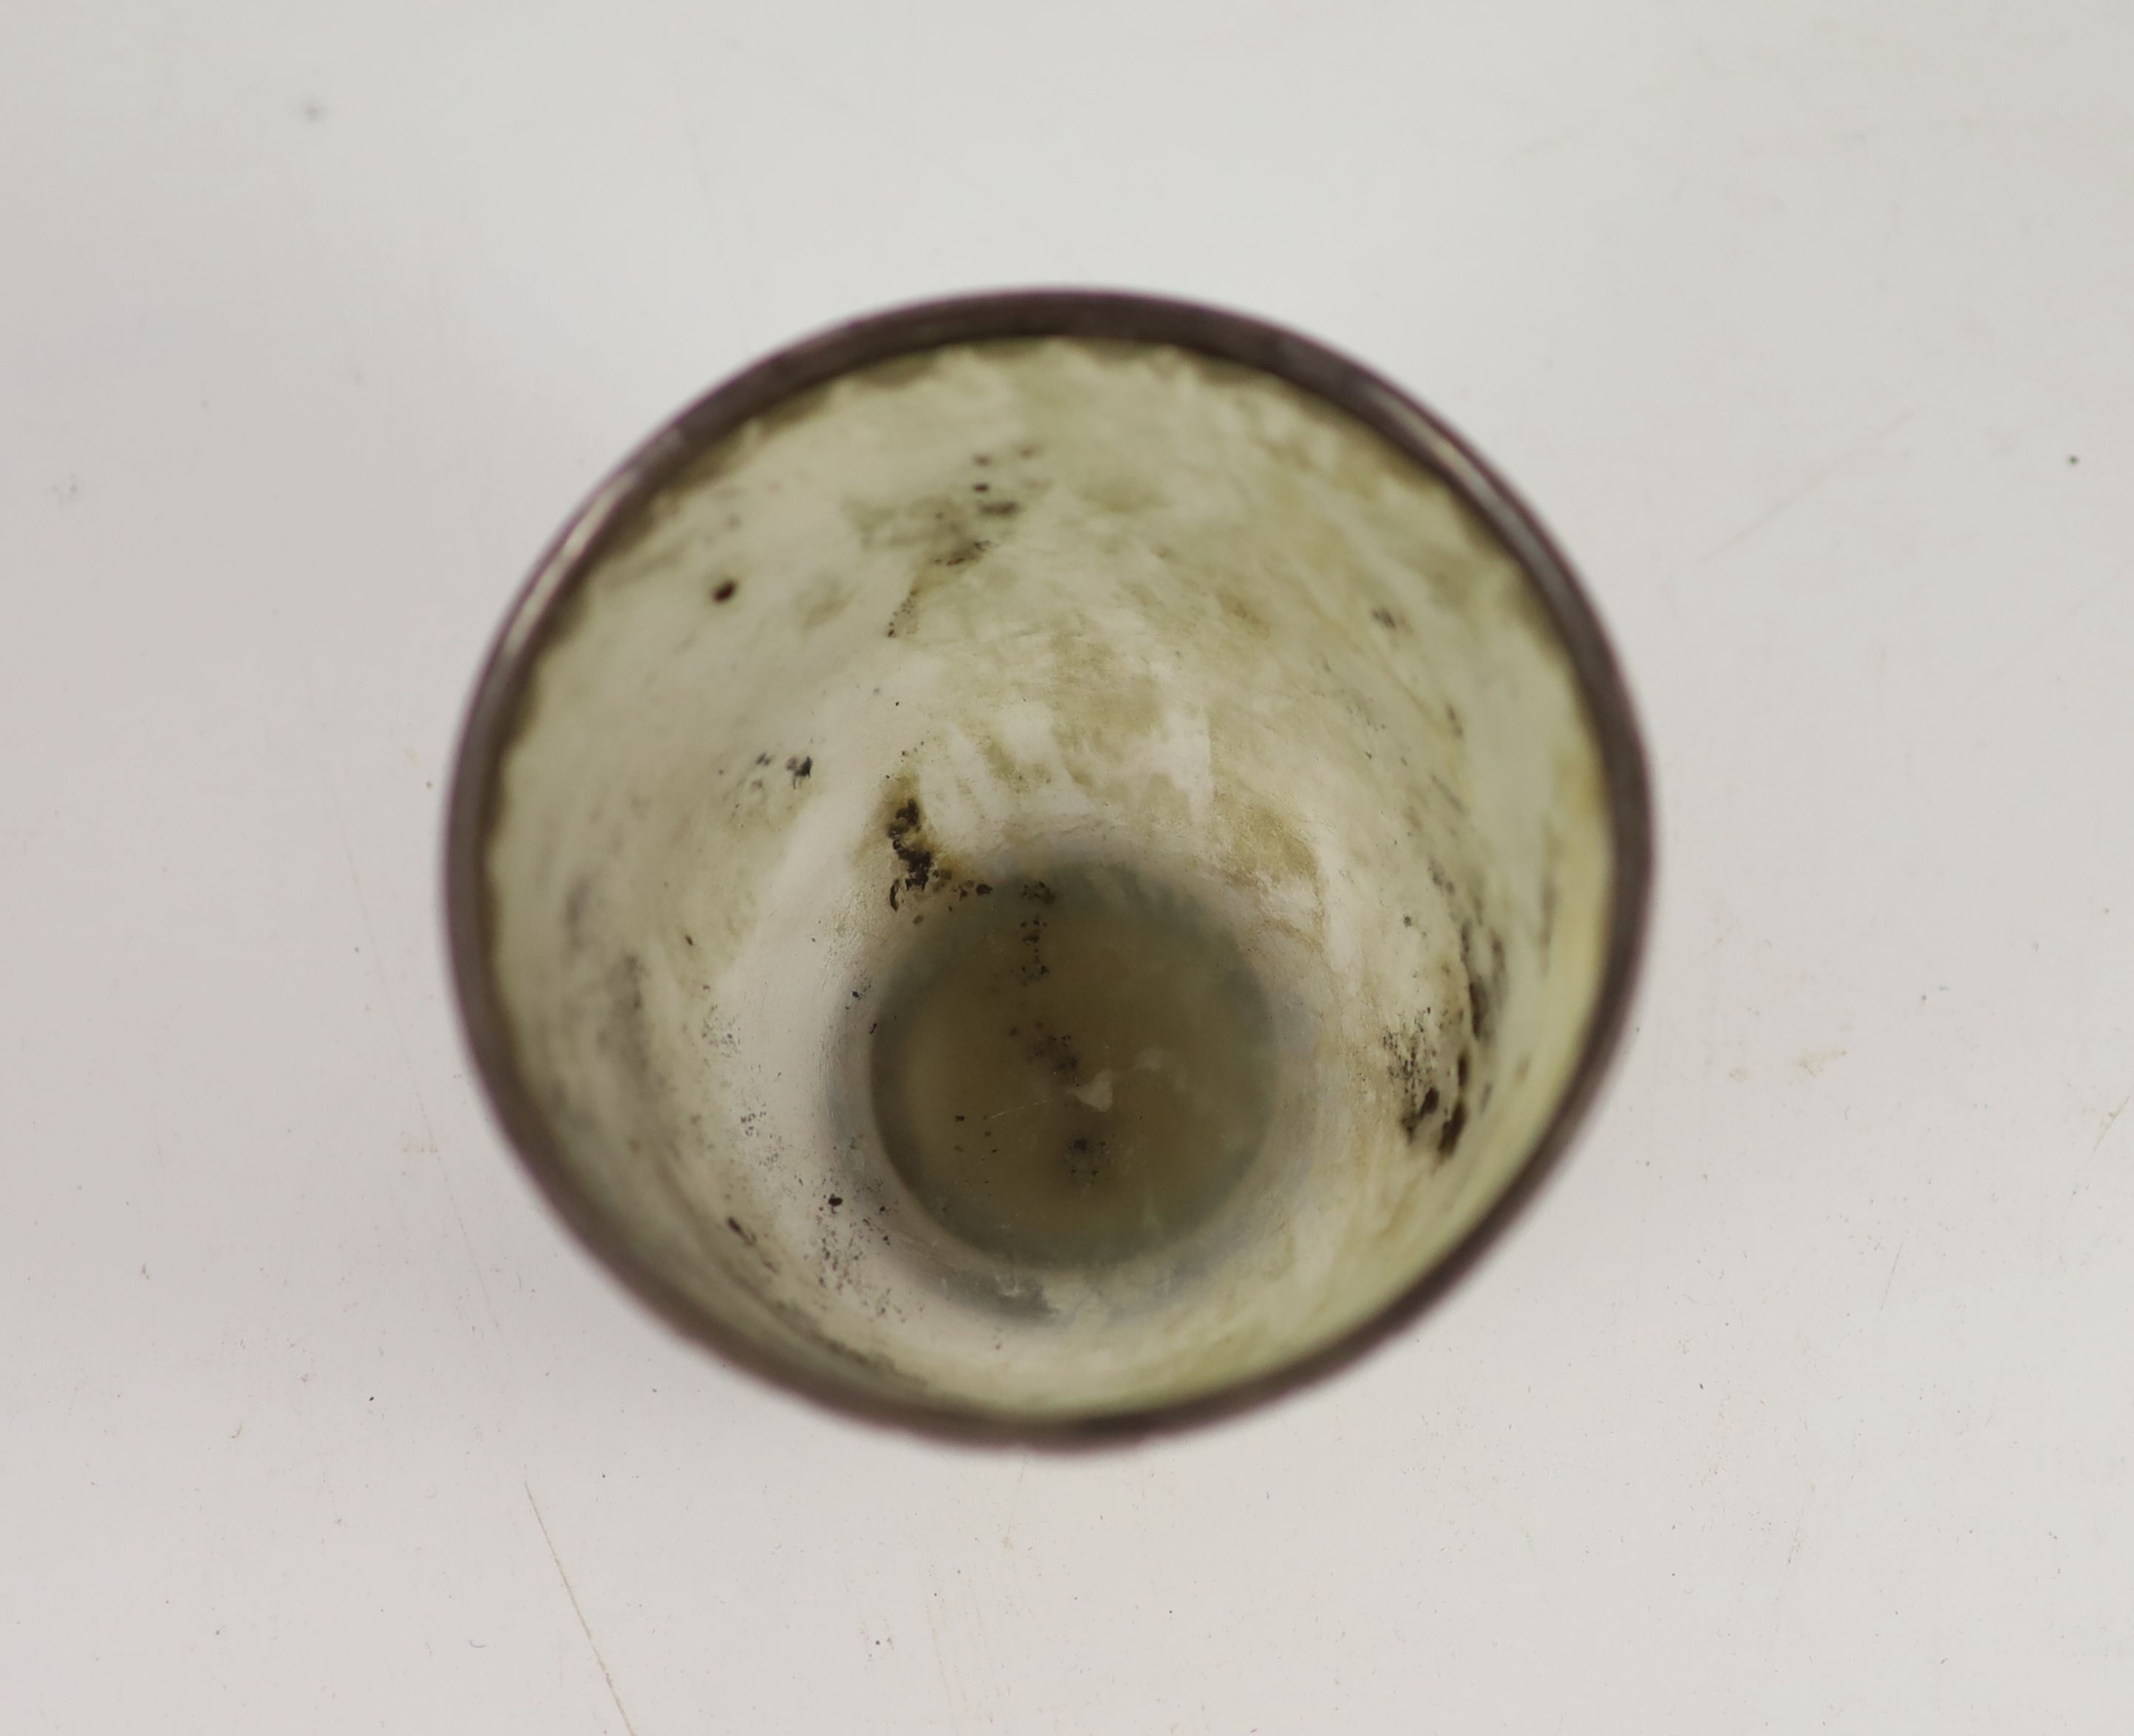 A silver mounted moss agate bowl, possibly 17th century, 7.8 cm diameter